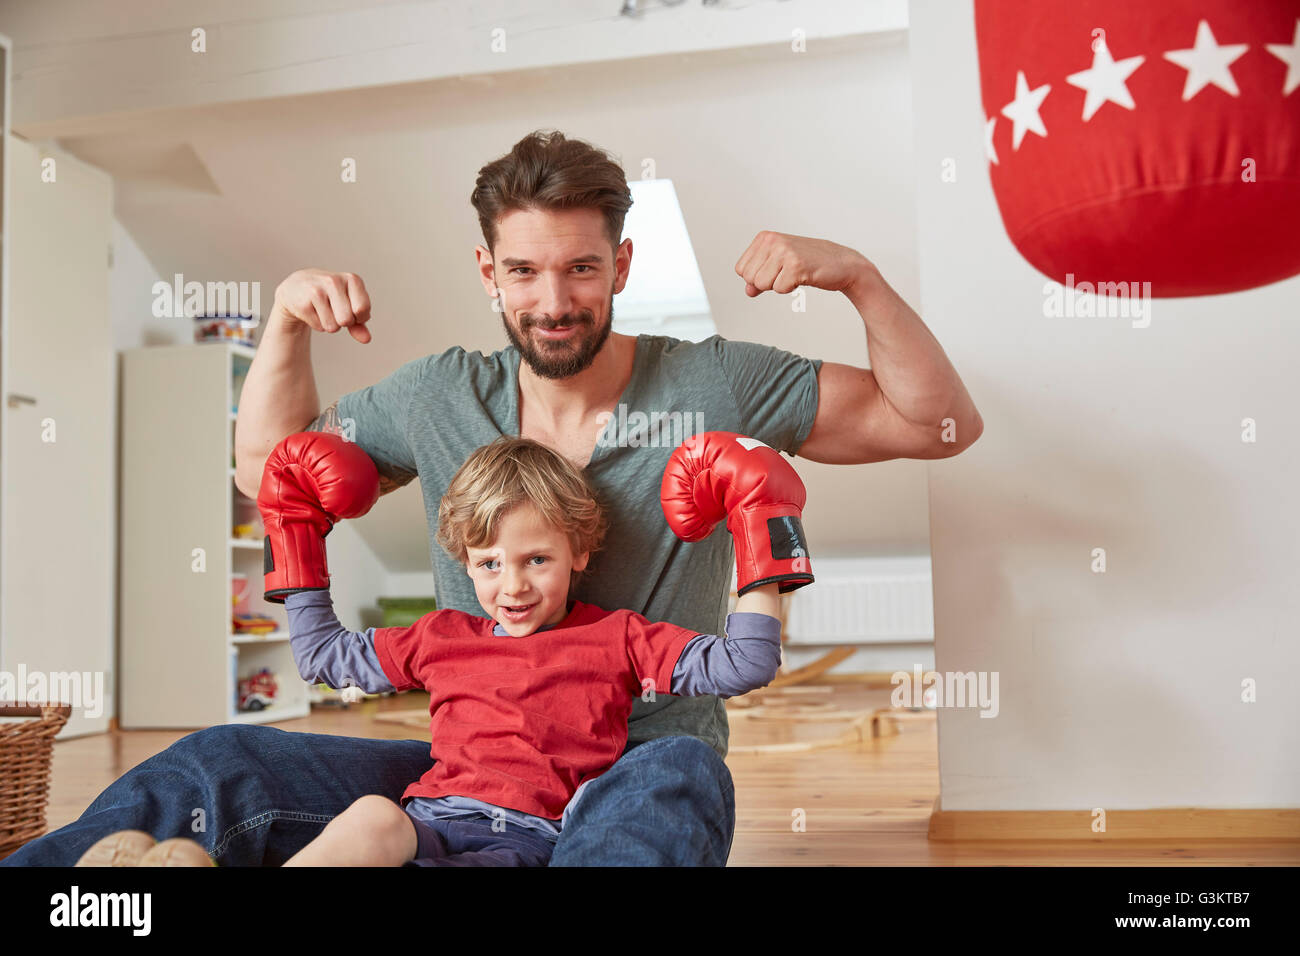 Boy wearing boxing with father, flexing muscles looking at camera Stock Photo